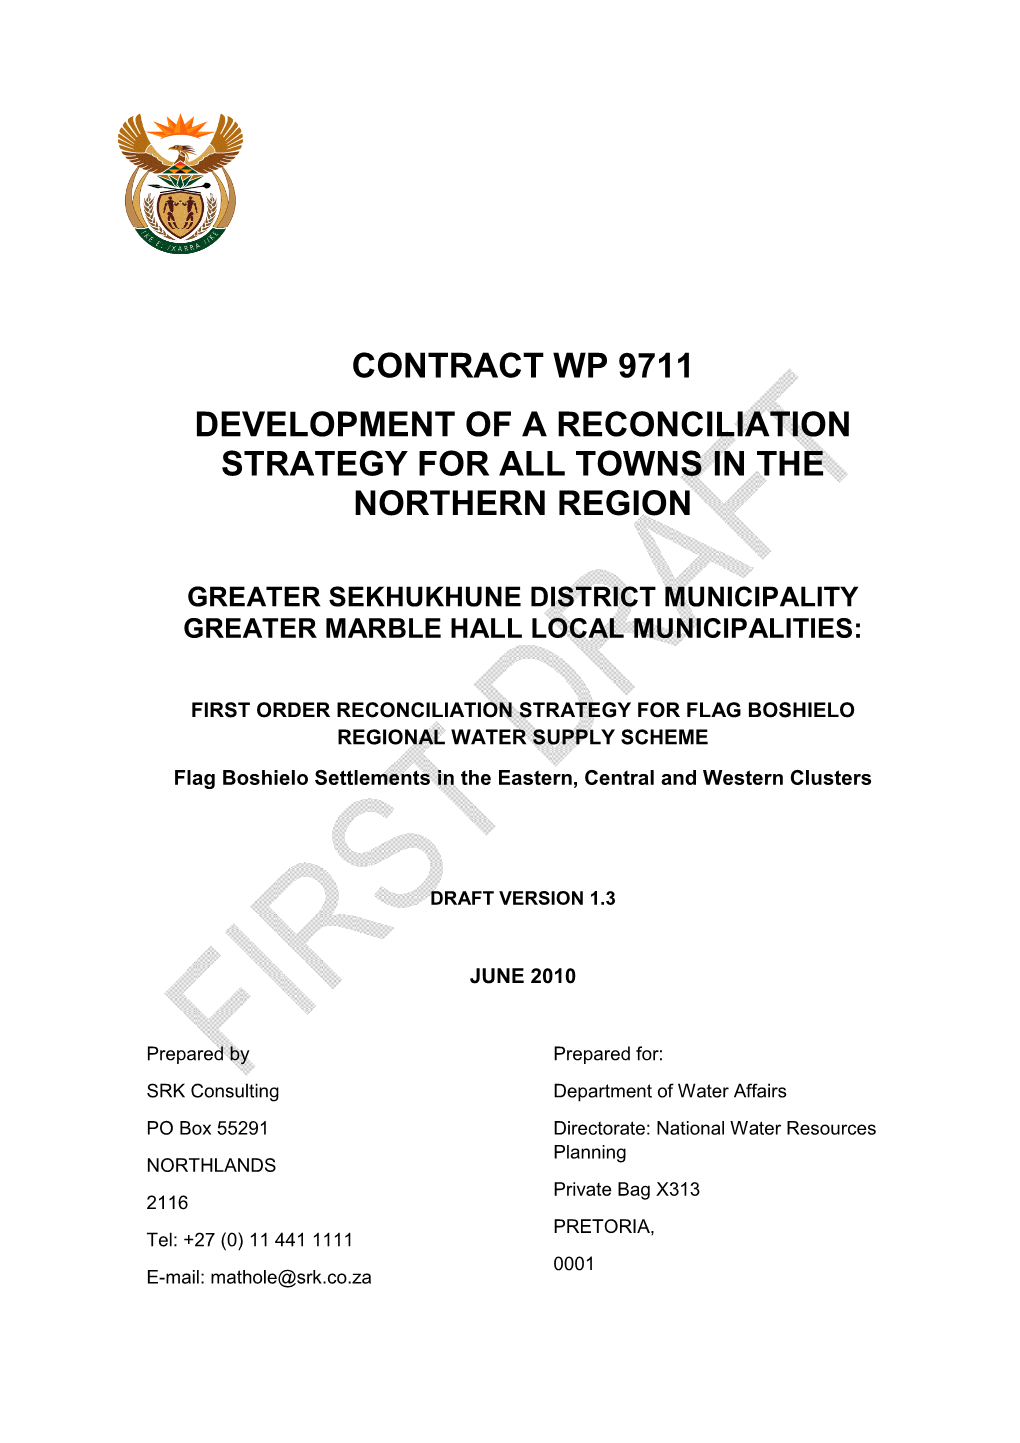 Contract Wp 9711 Development of a Reconciliation Strategy for All Towns in the Northern Region